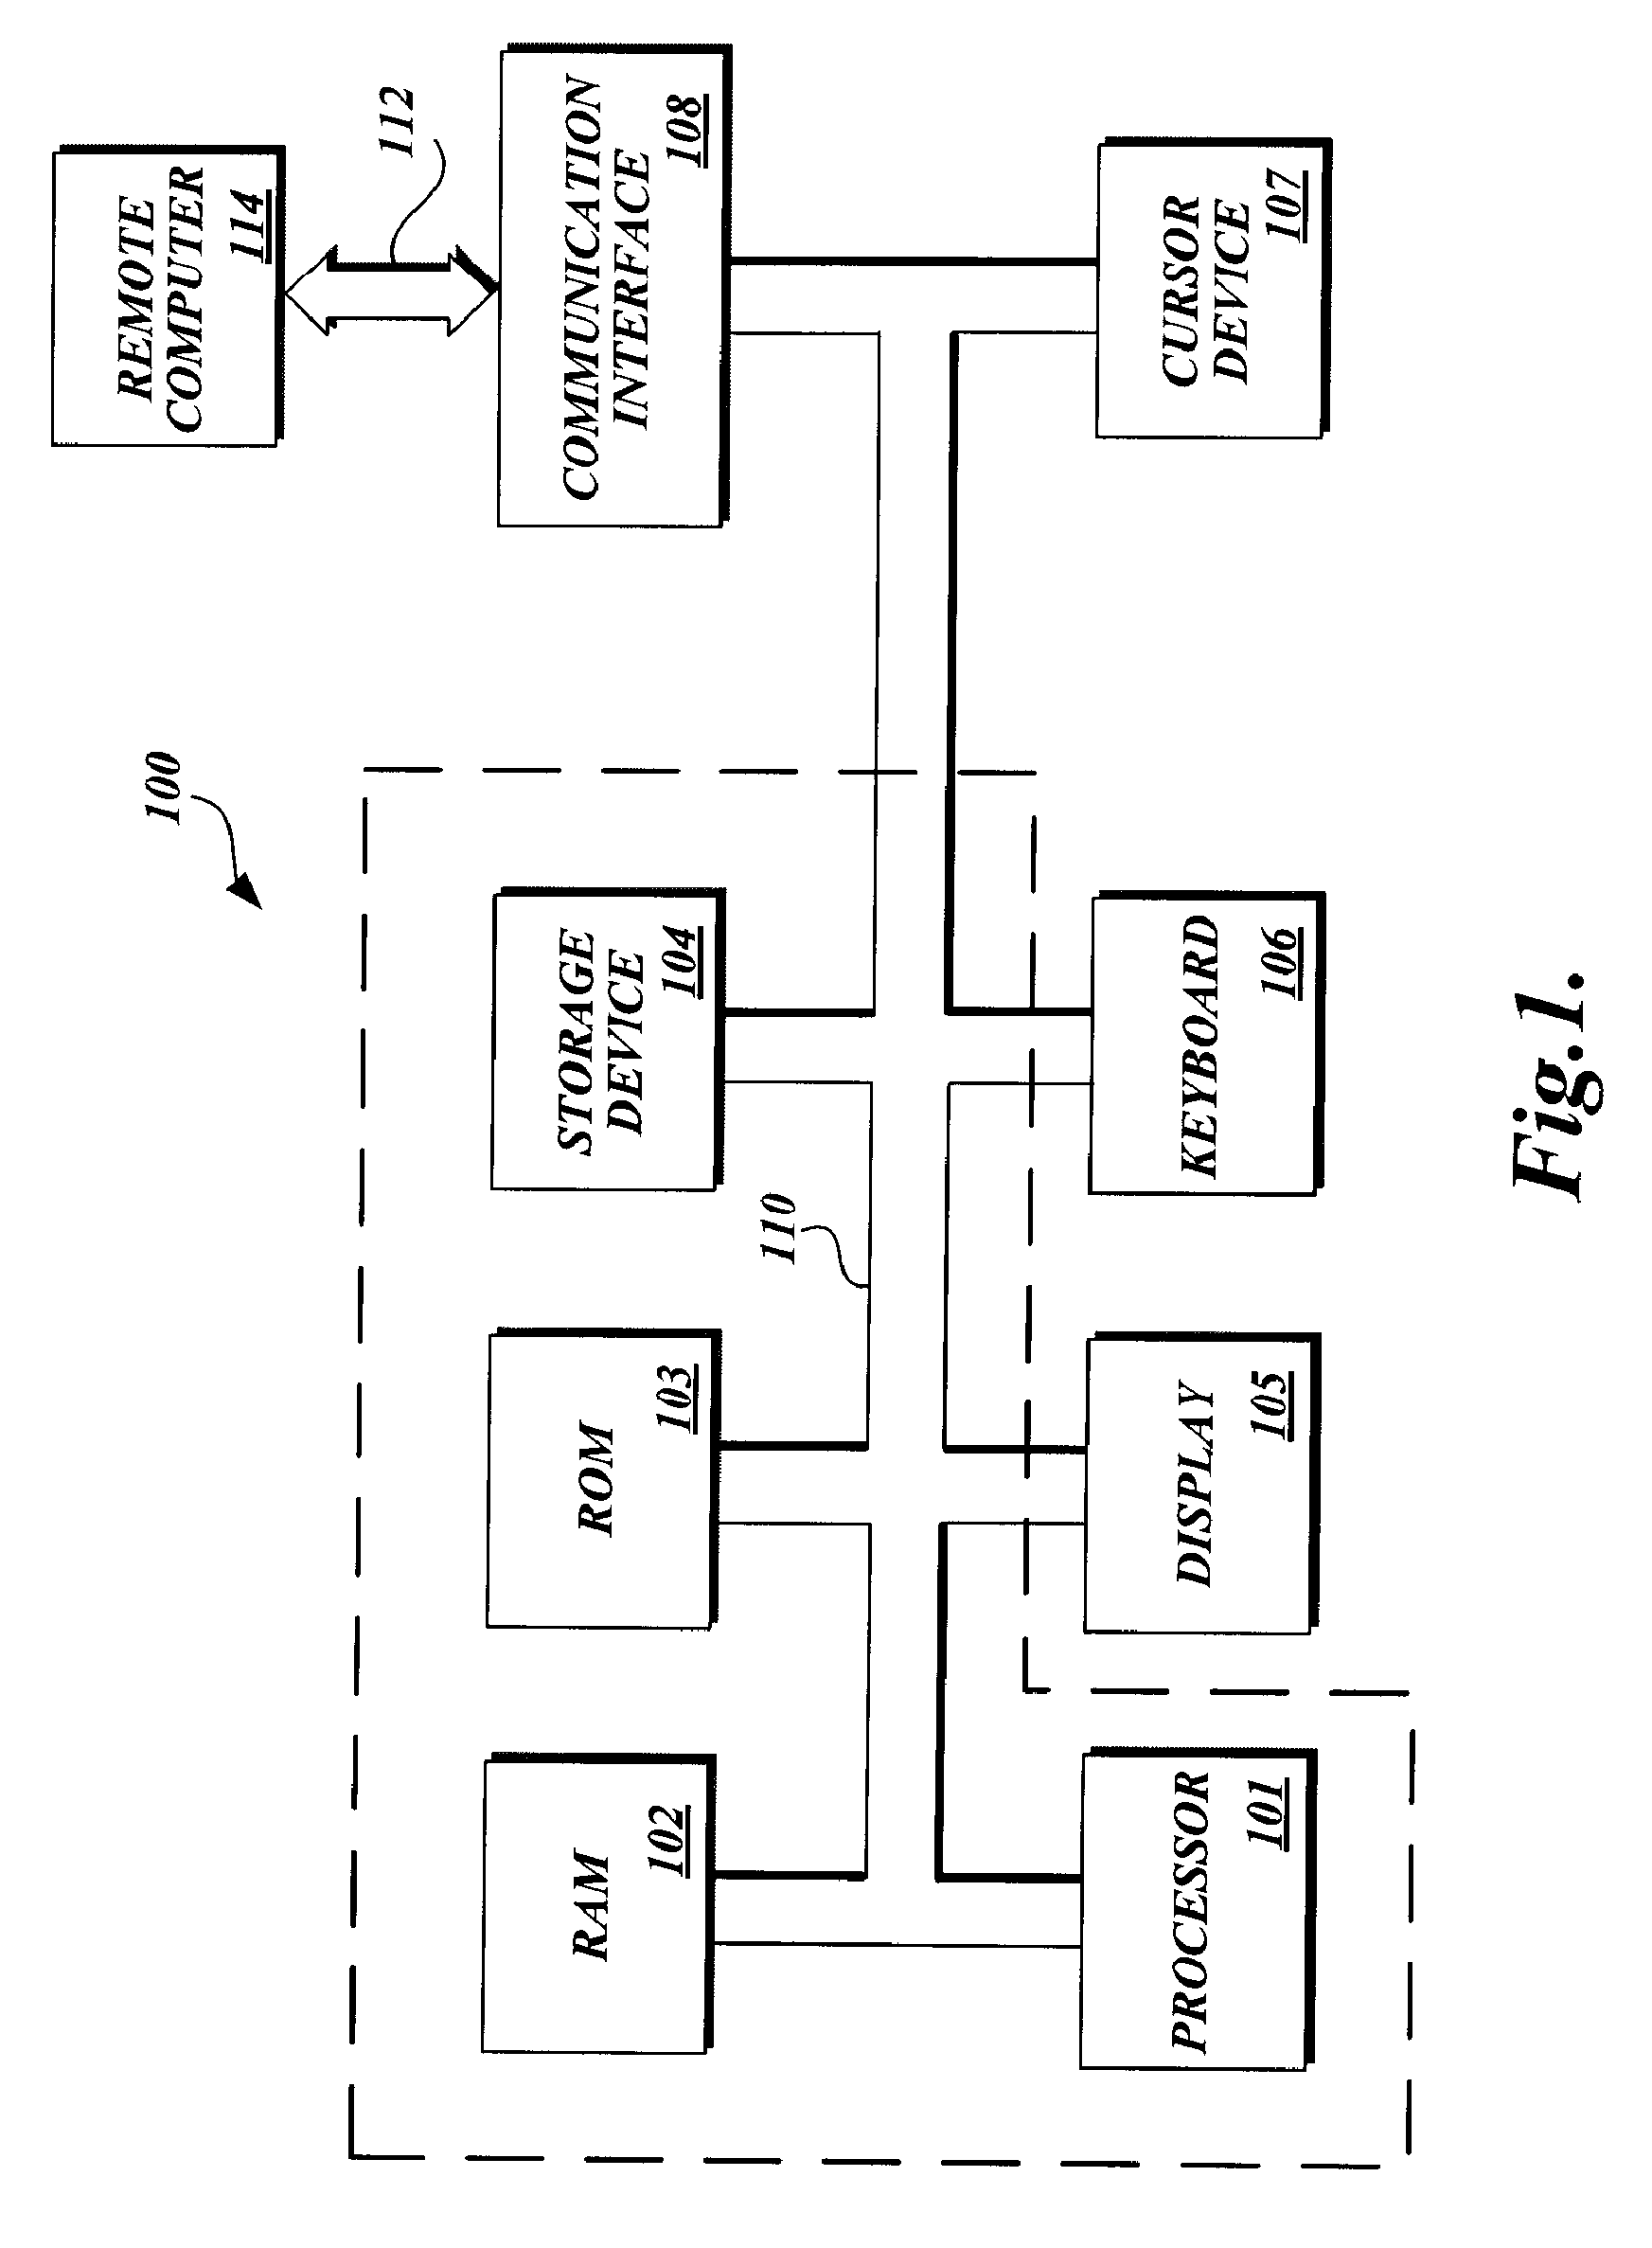 Method and apparatus for providing foreign language text display when encoding is not available